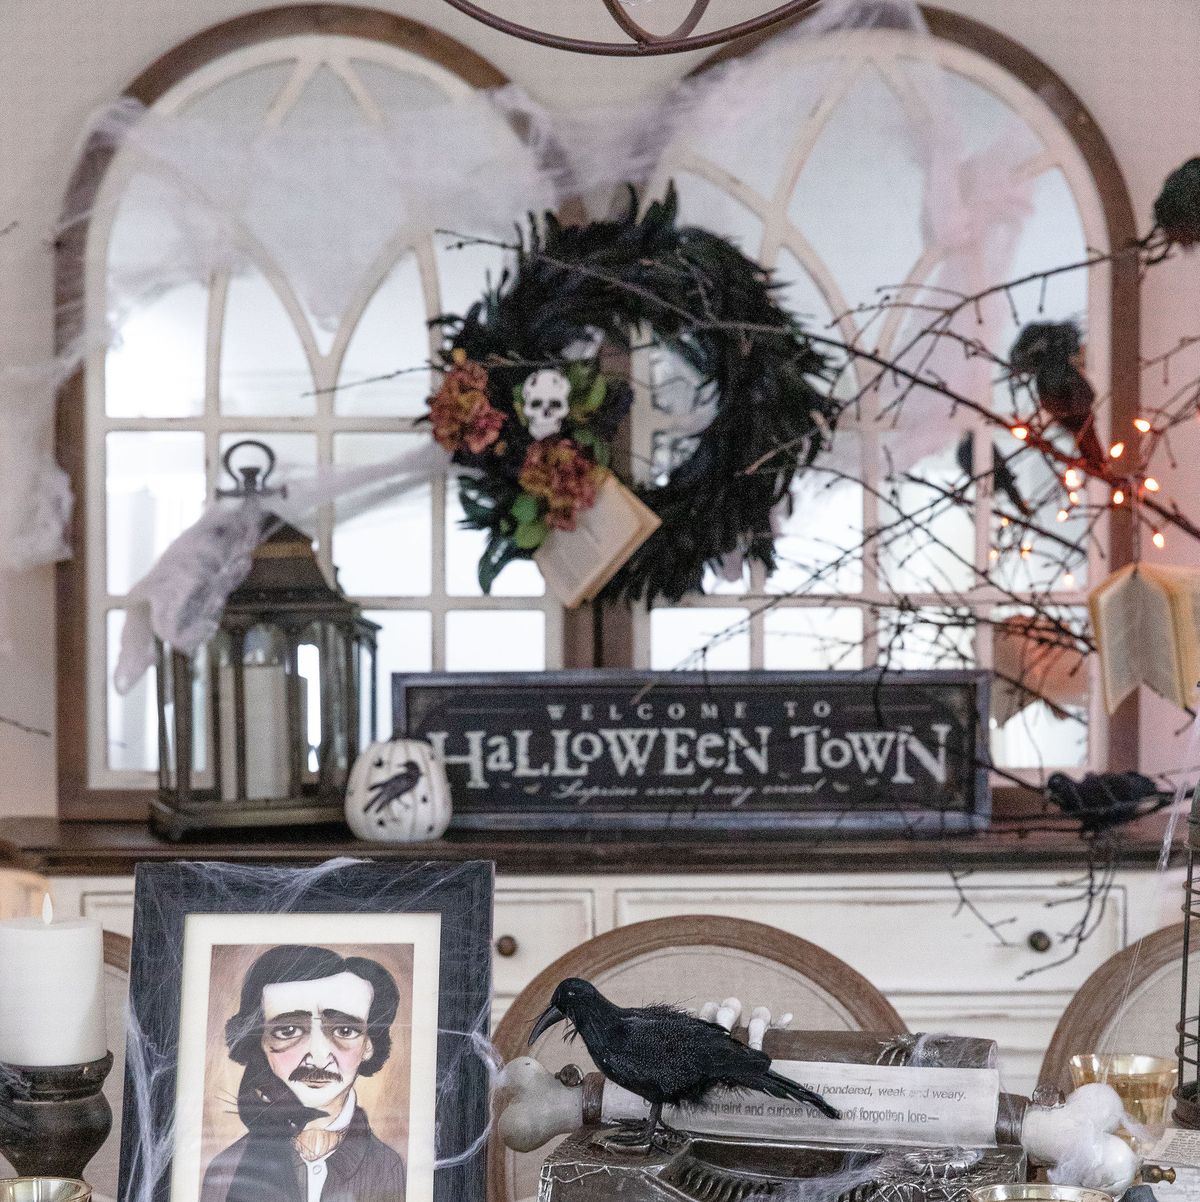 This Edgar Allen Poe-Themed Tablescape Is Perfect for Halloween